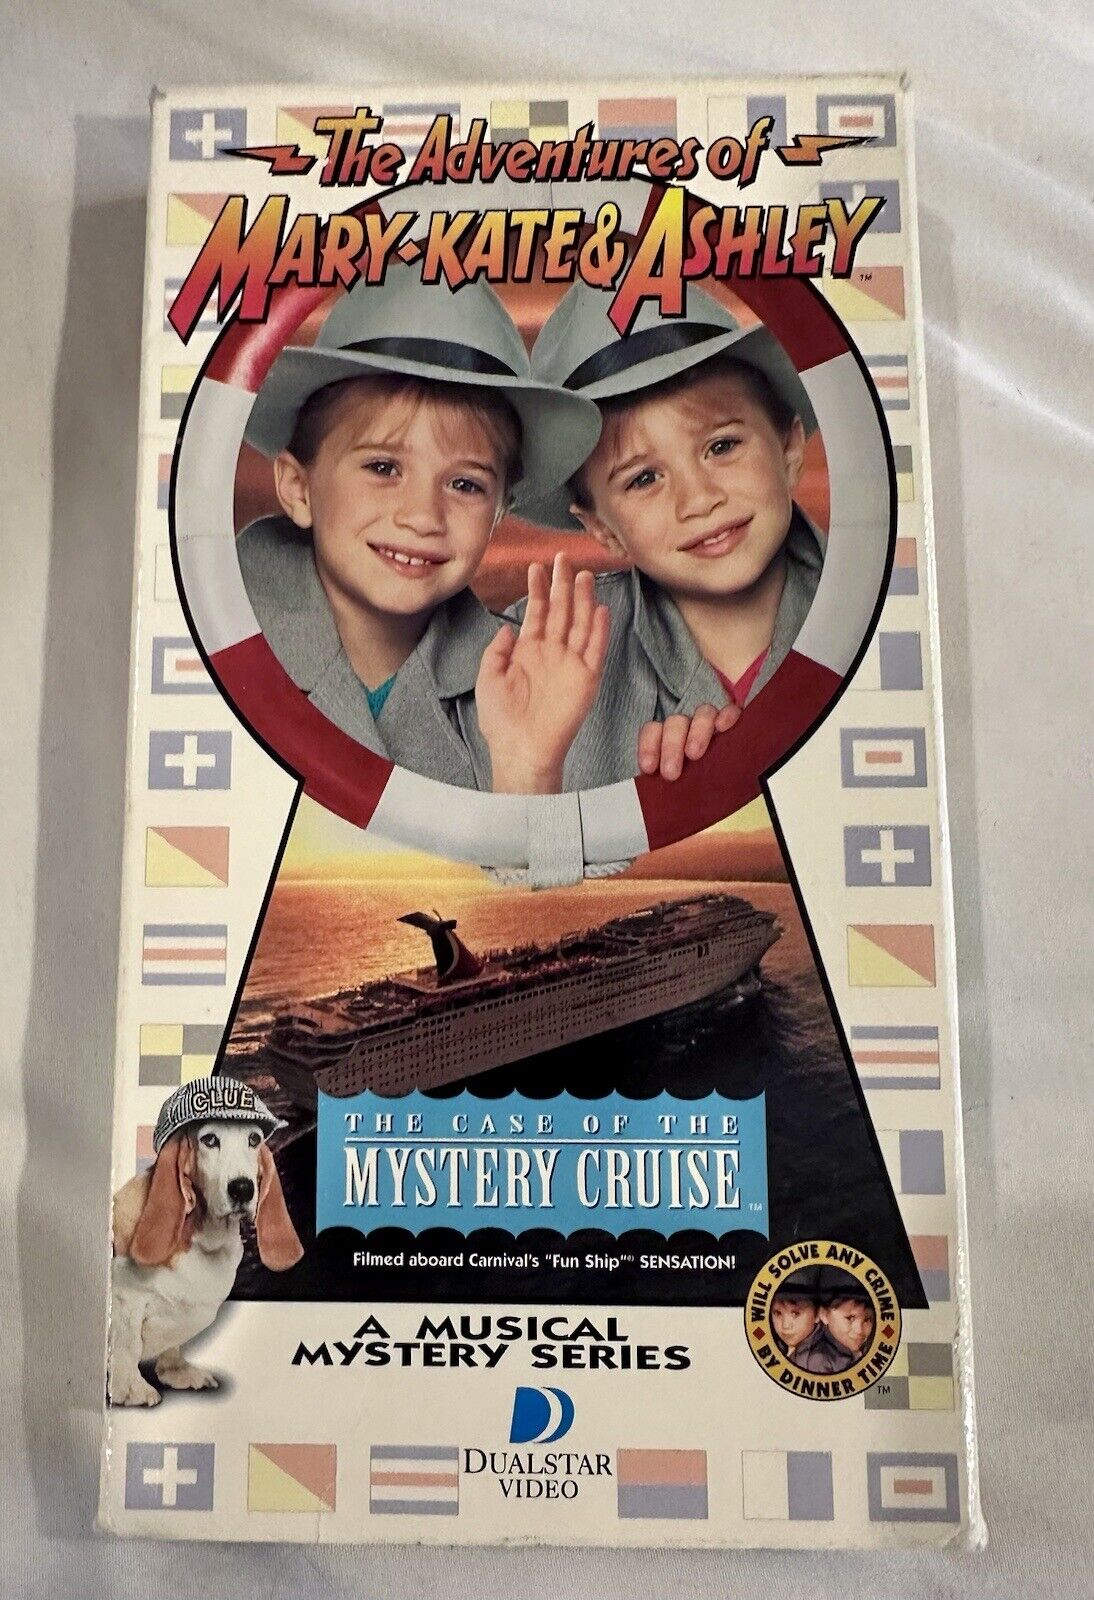 The Adventures of Mary Kate & Ashley Olson Case Of Mystery Cruise - VHS VCR TAPE